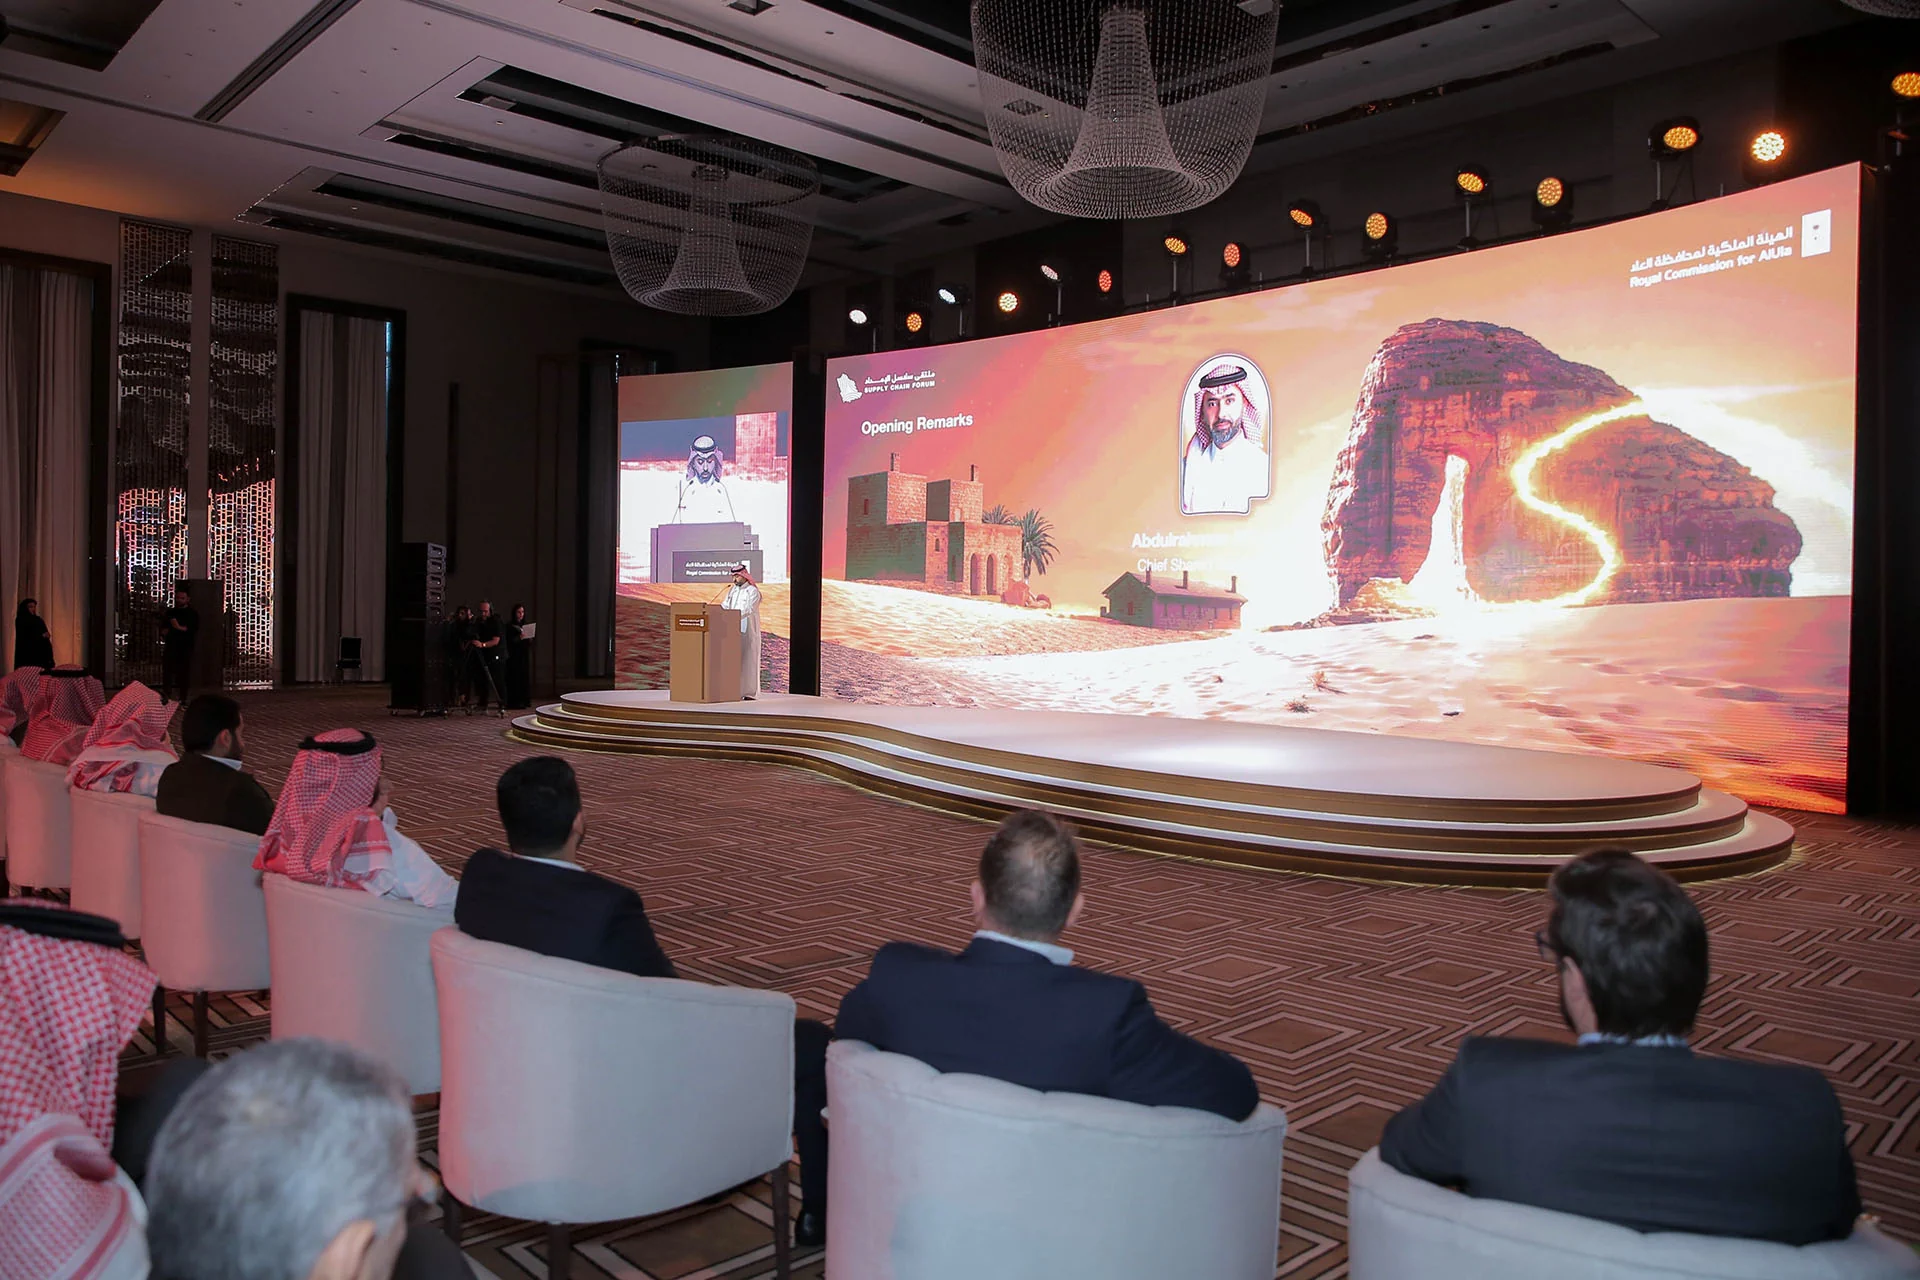 Supply Chain Forum RCU event, Managed and Crafted by enso Arabia